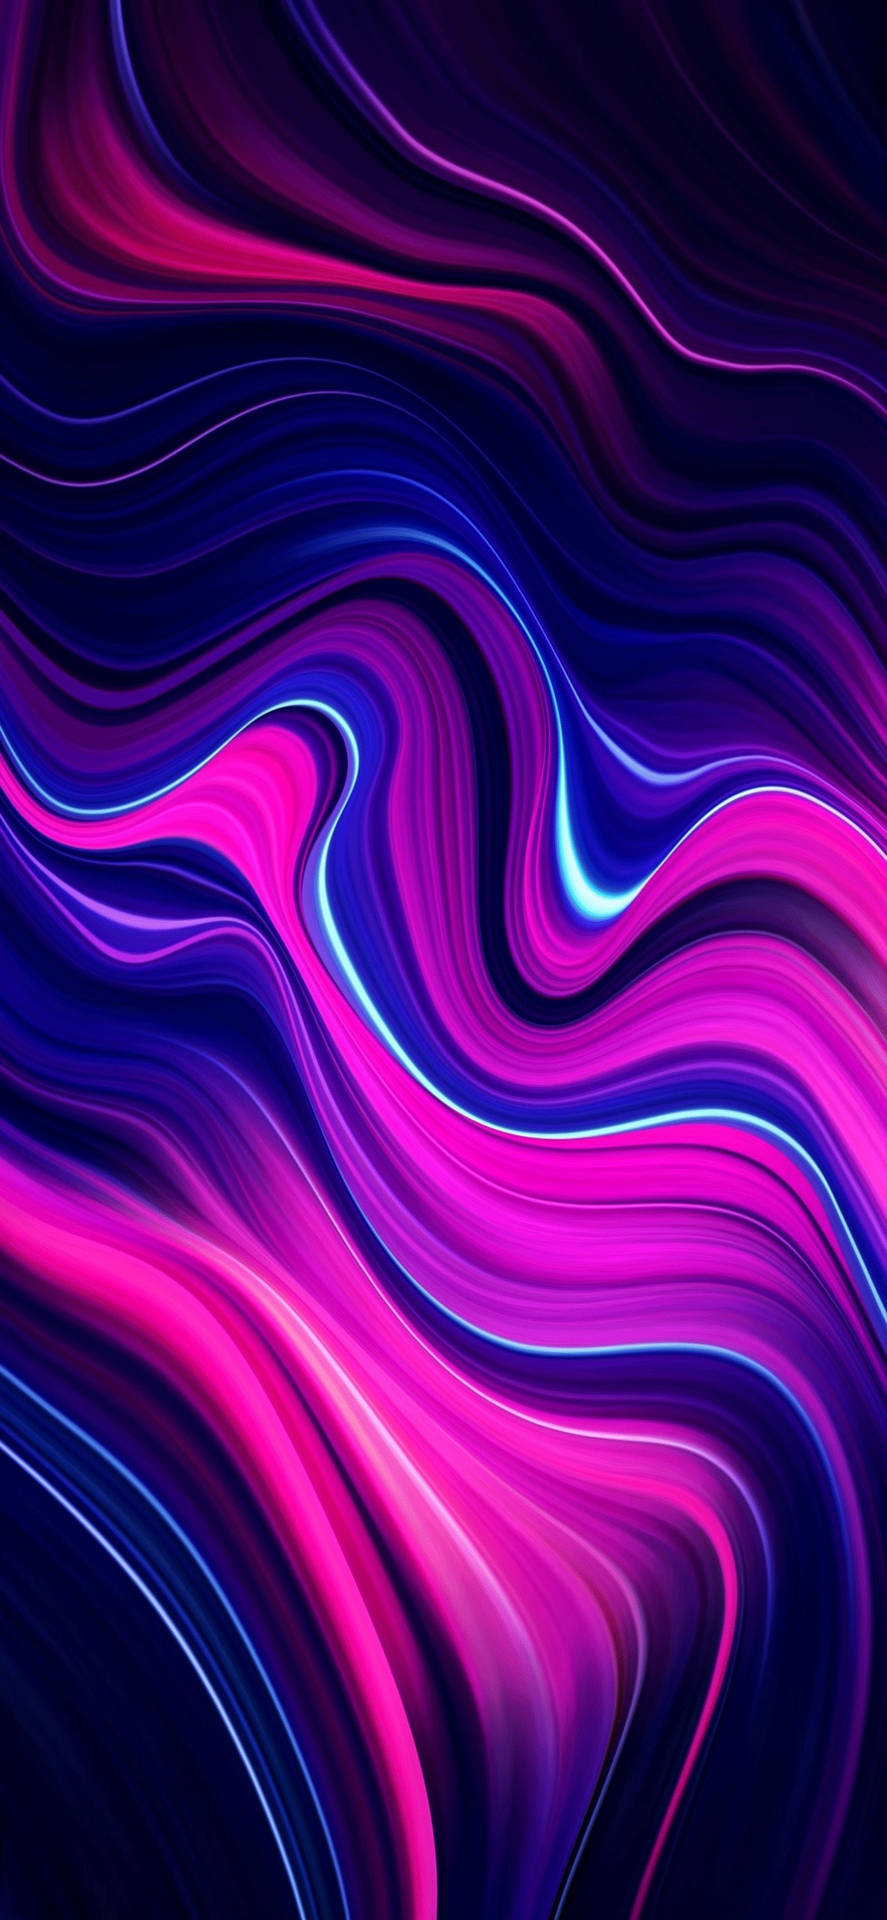 Cool Iphone 11 Purple And Blue Waves